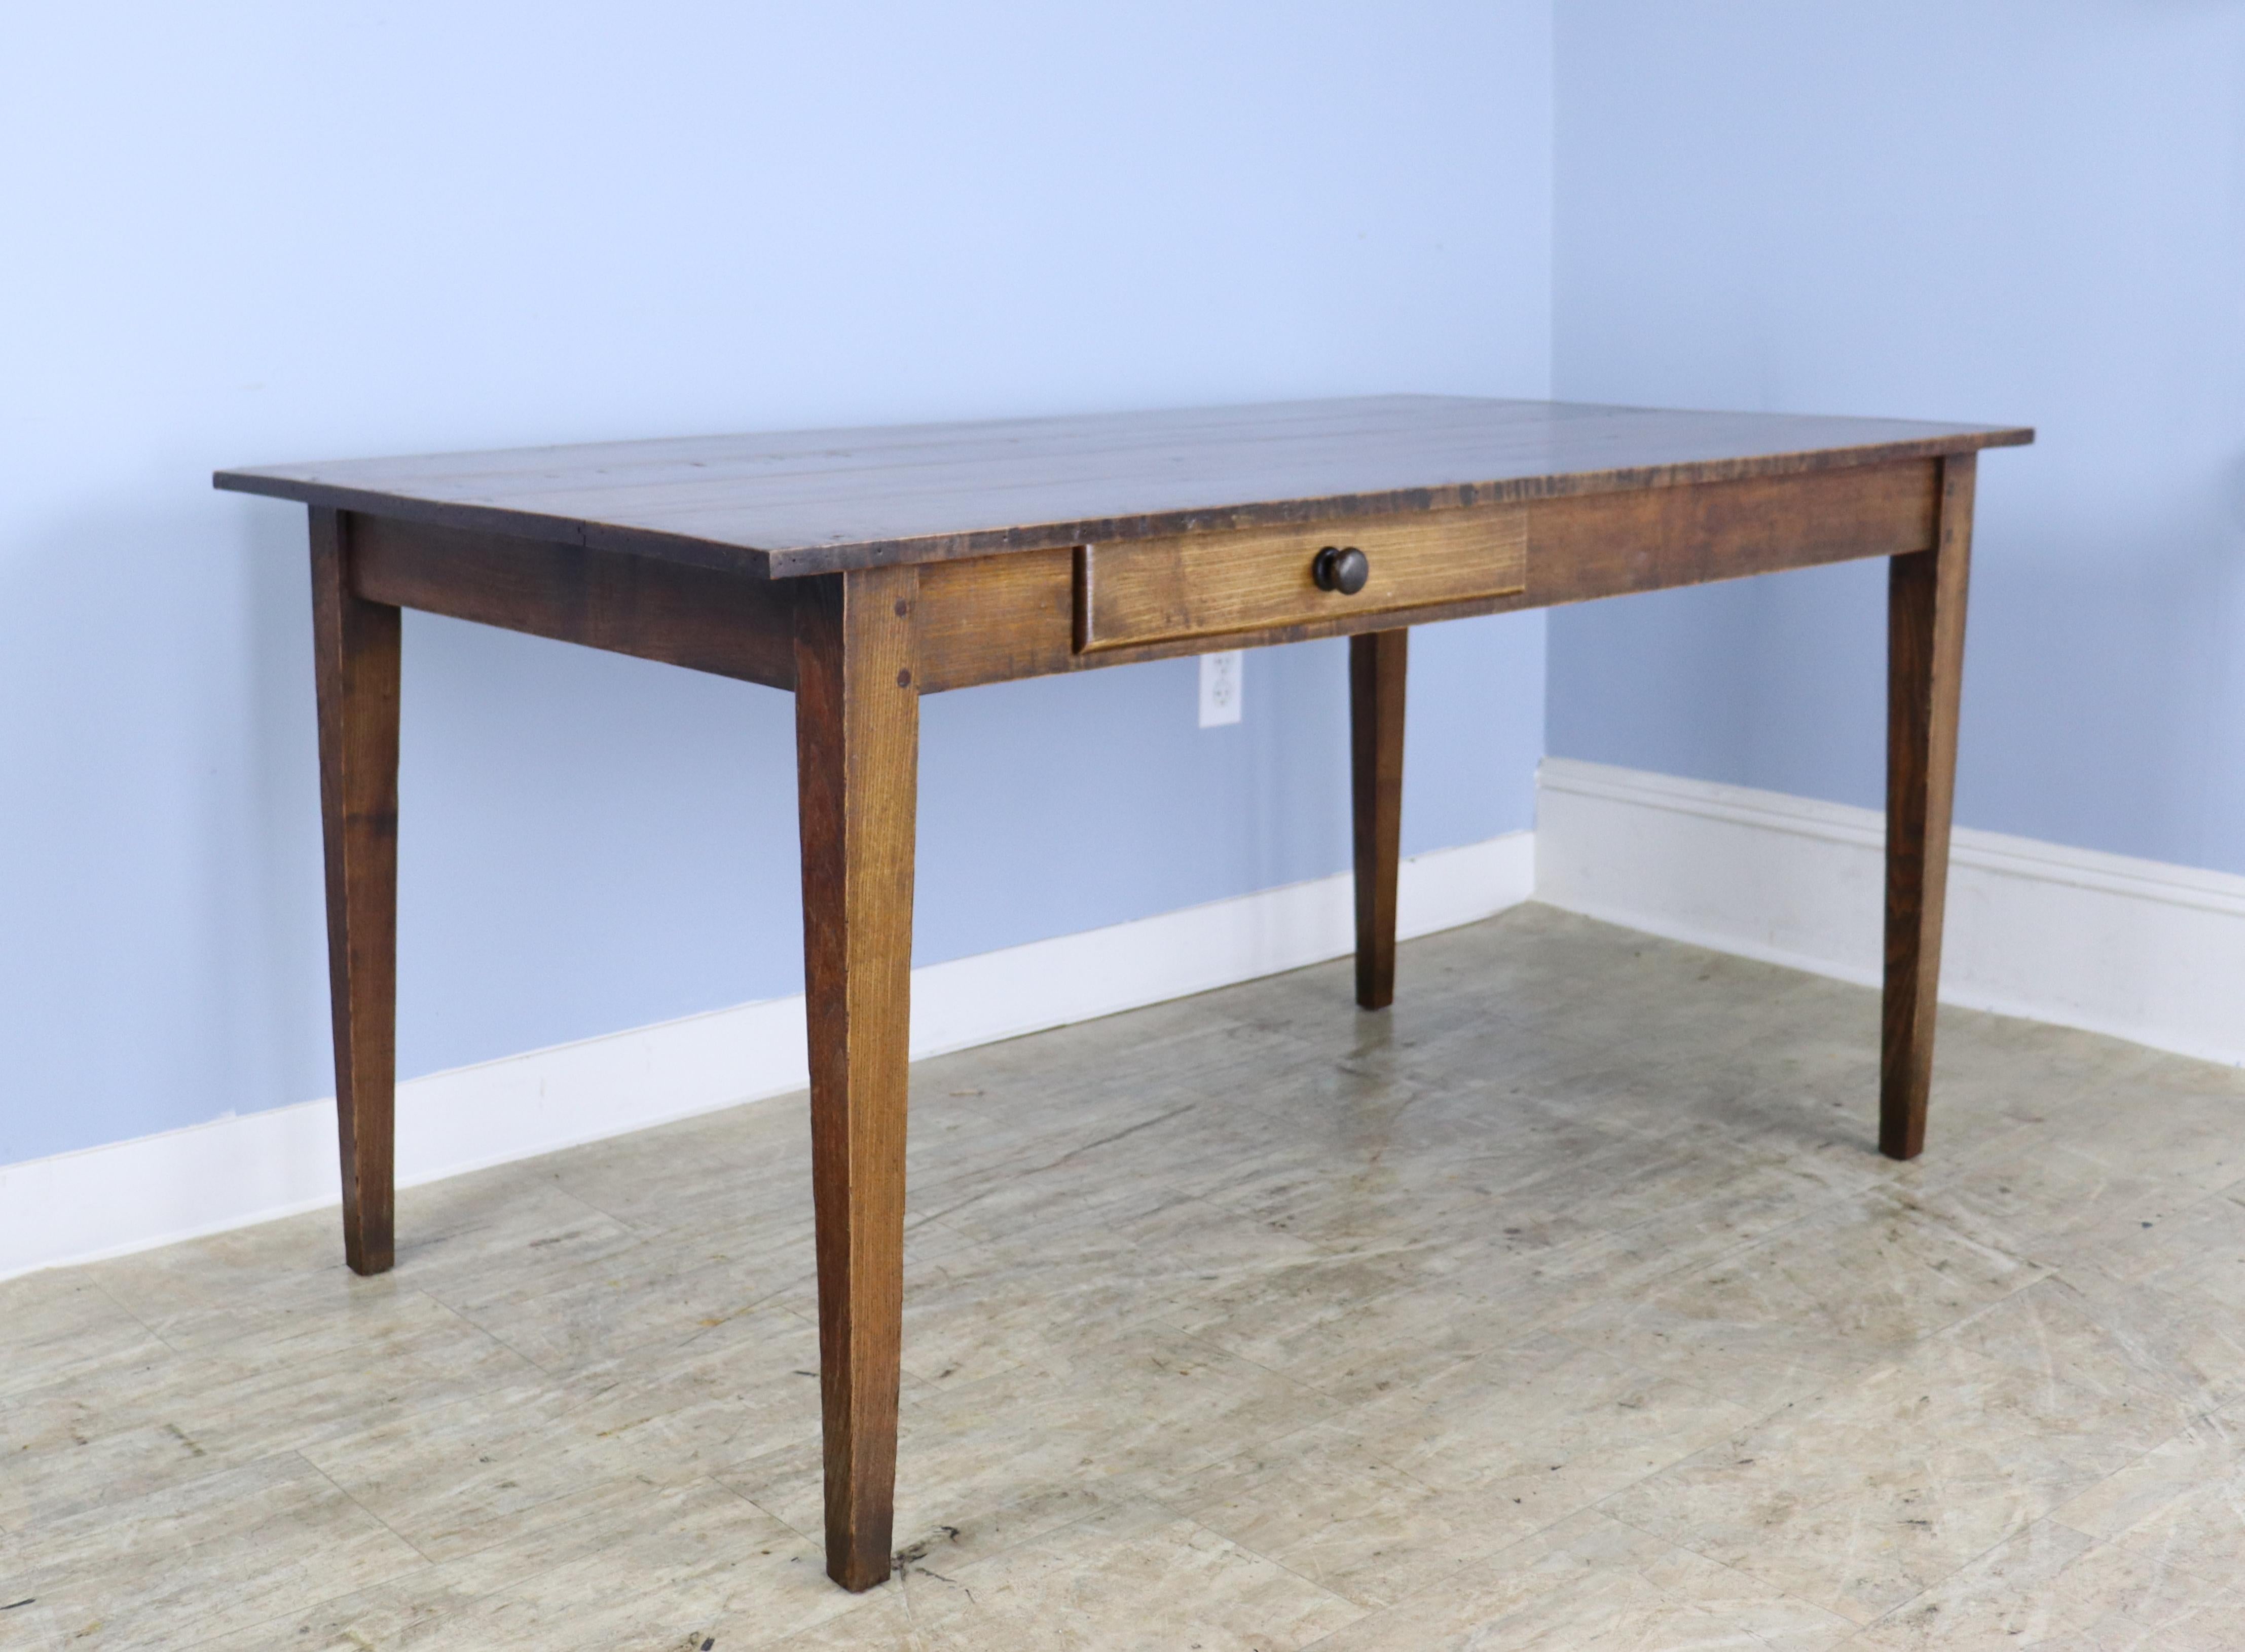 A simple, elegant and beautifully grained writing table or desk with a fruitwood top and an oak base. This piece is in very good antique condition with few flaws and a handsome presence. 24.5 inch apron height is just right for knees.  There are 50